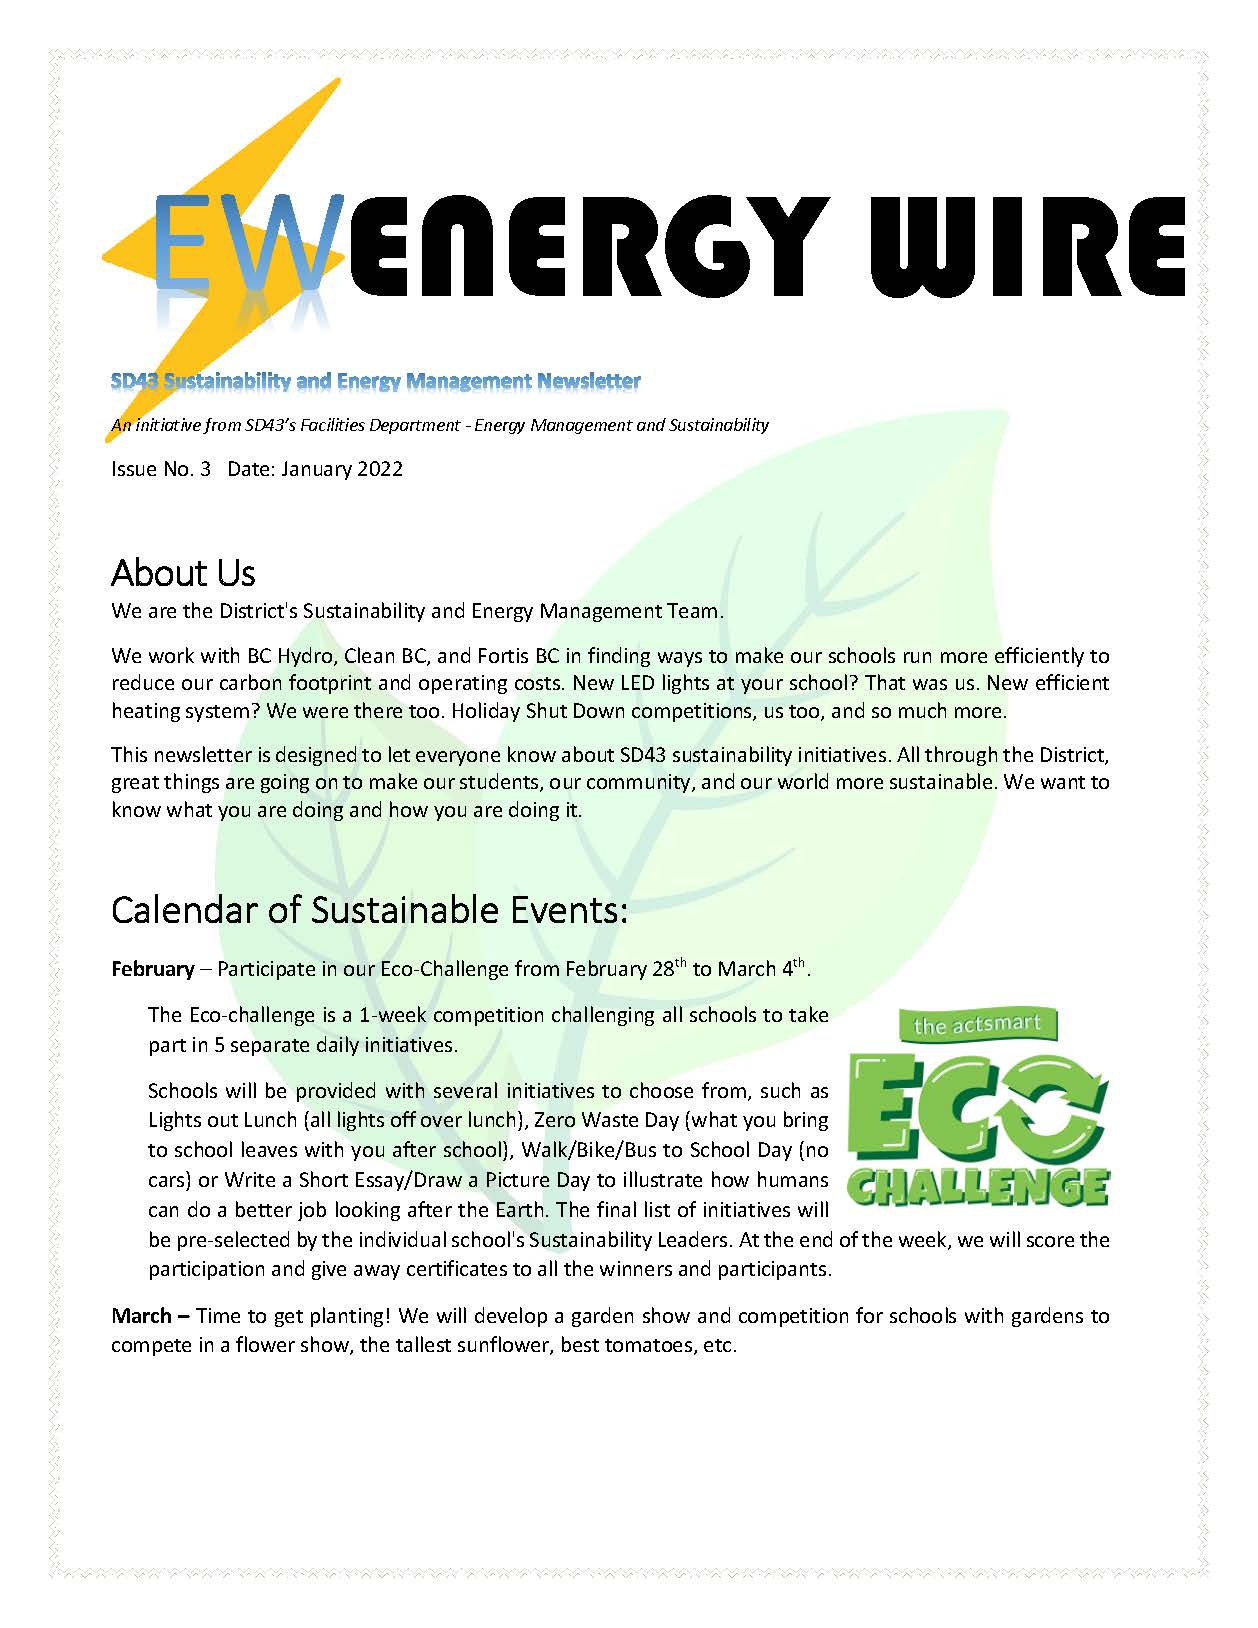 Energy Wire Newsletter january 2022_Page_1.jpg